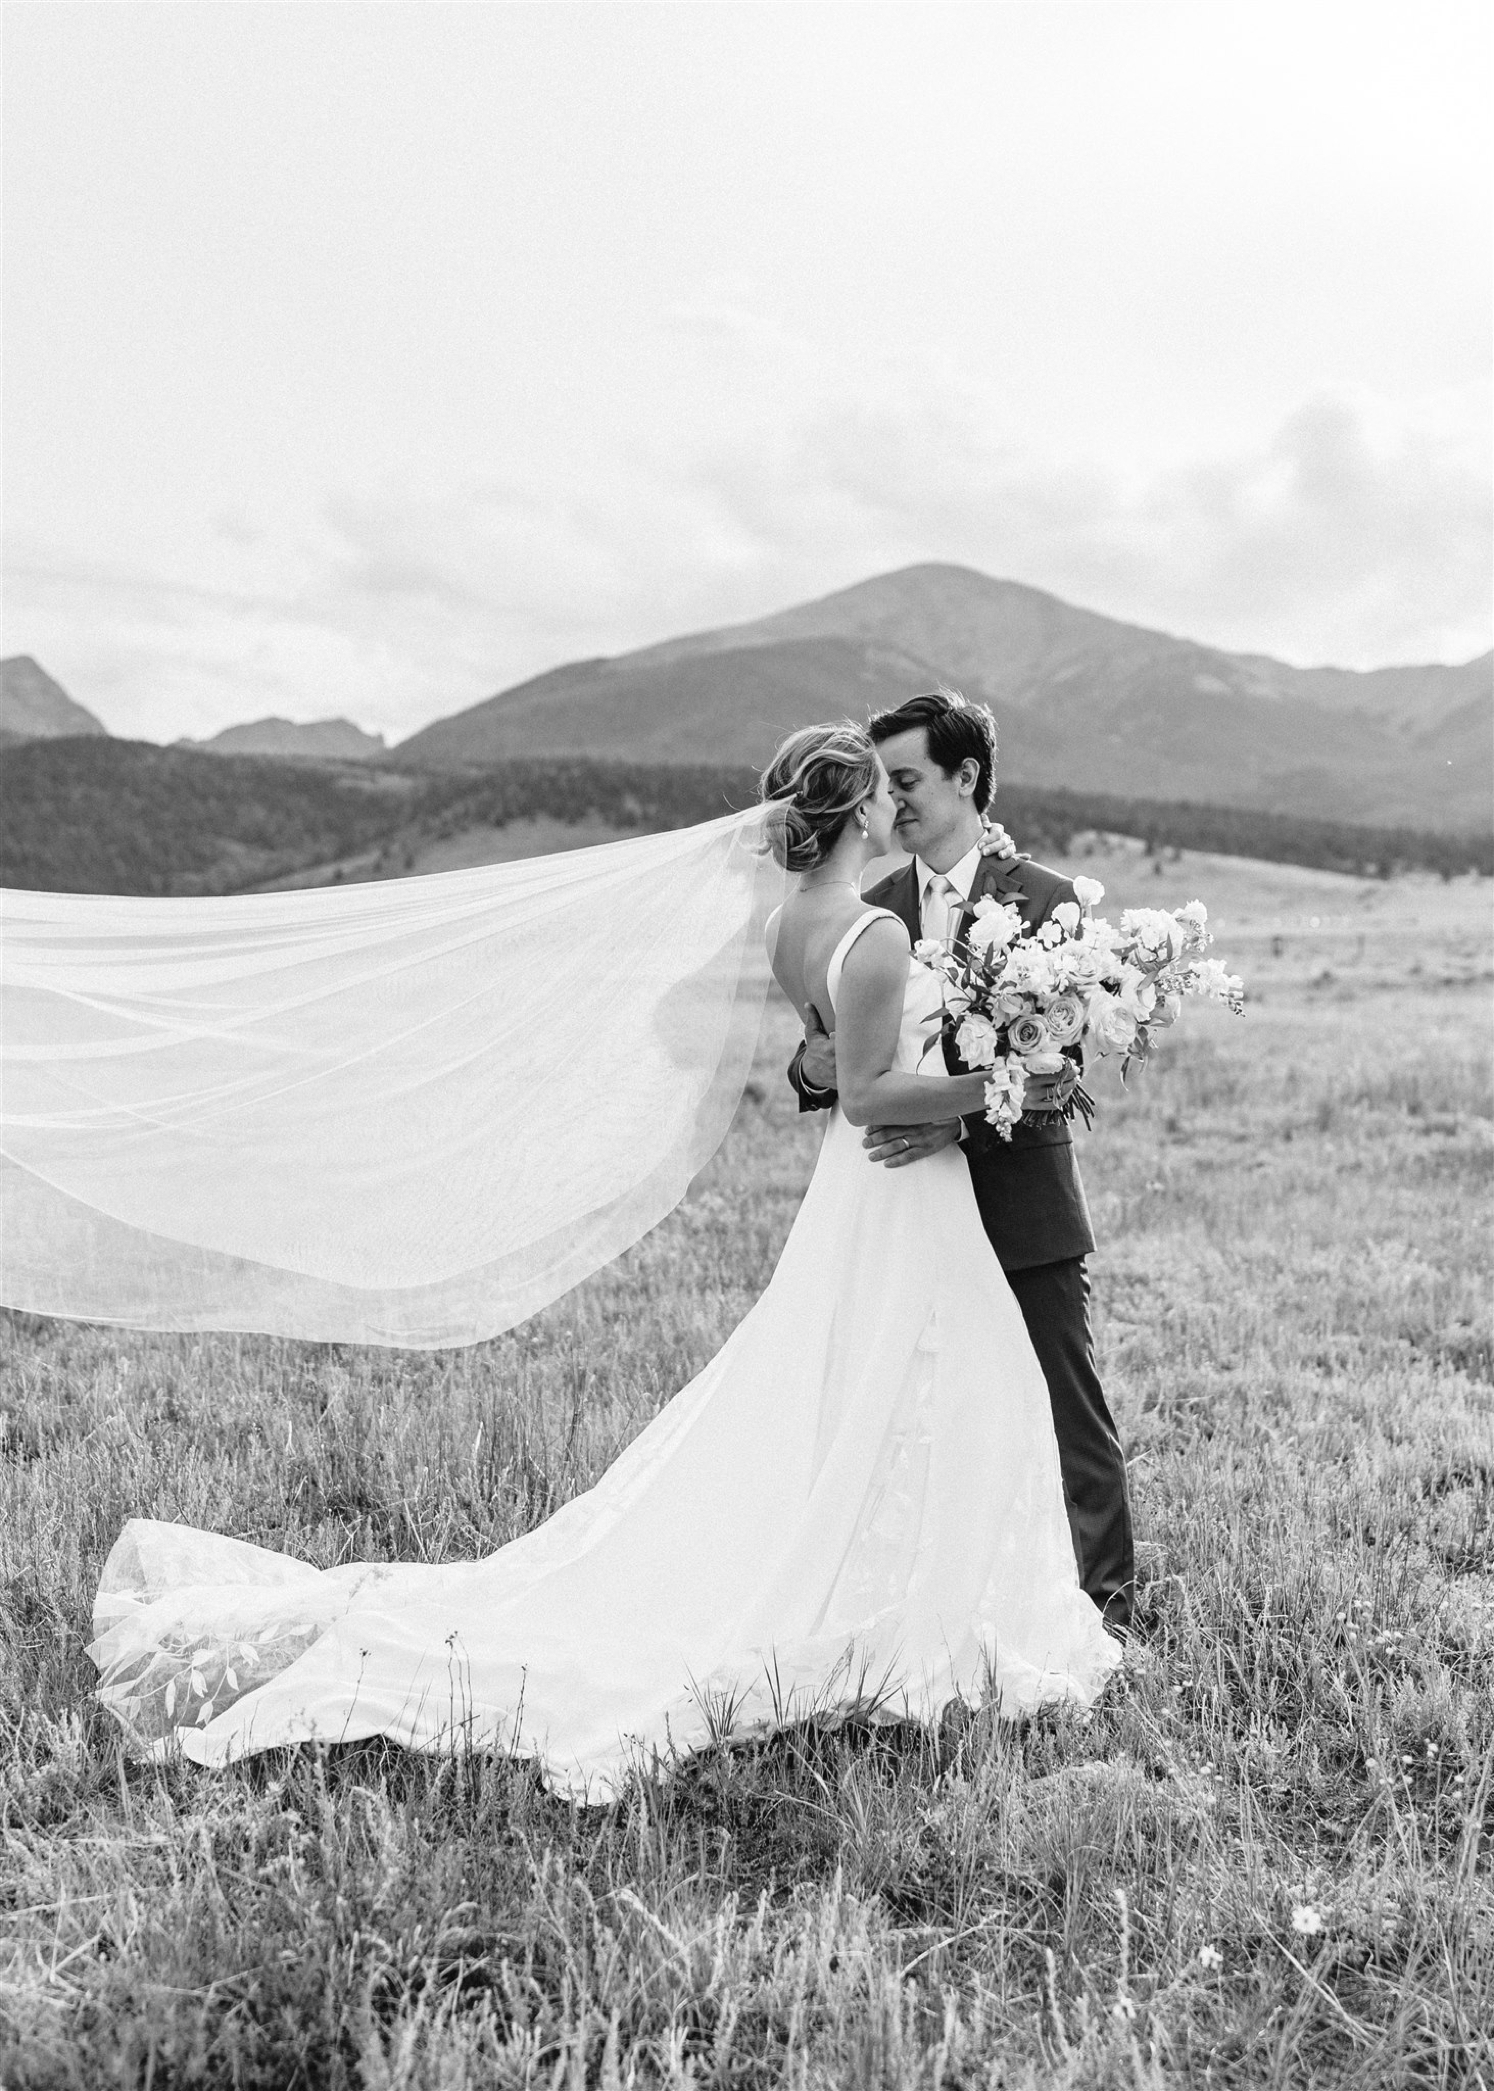 Bride and groom looking at each other with veil flowing in the wind | McArthur Weddings and Events